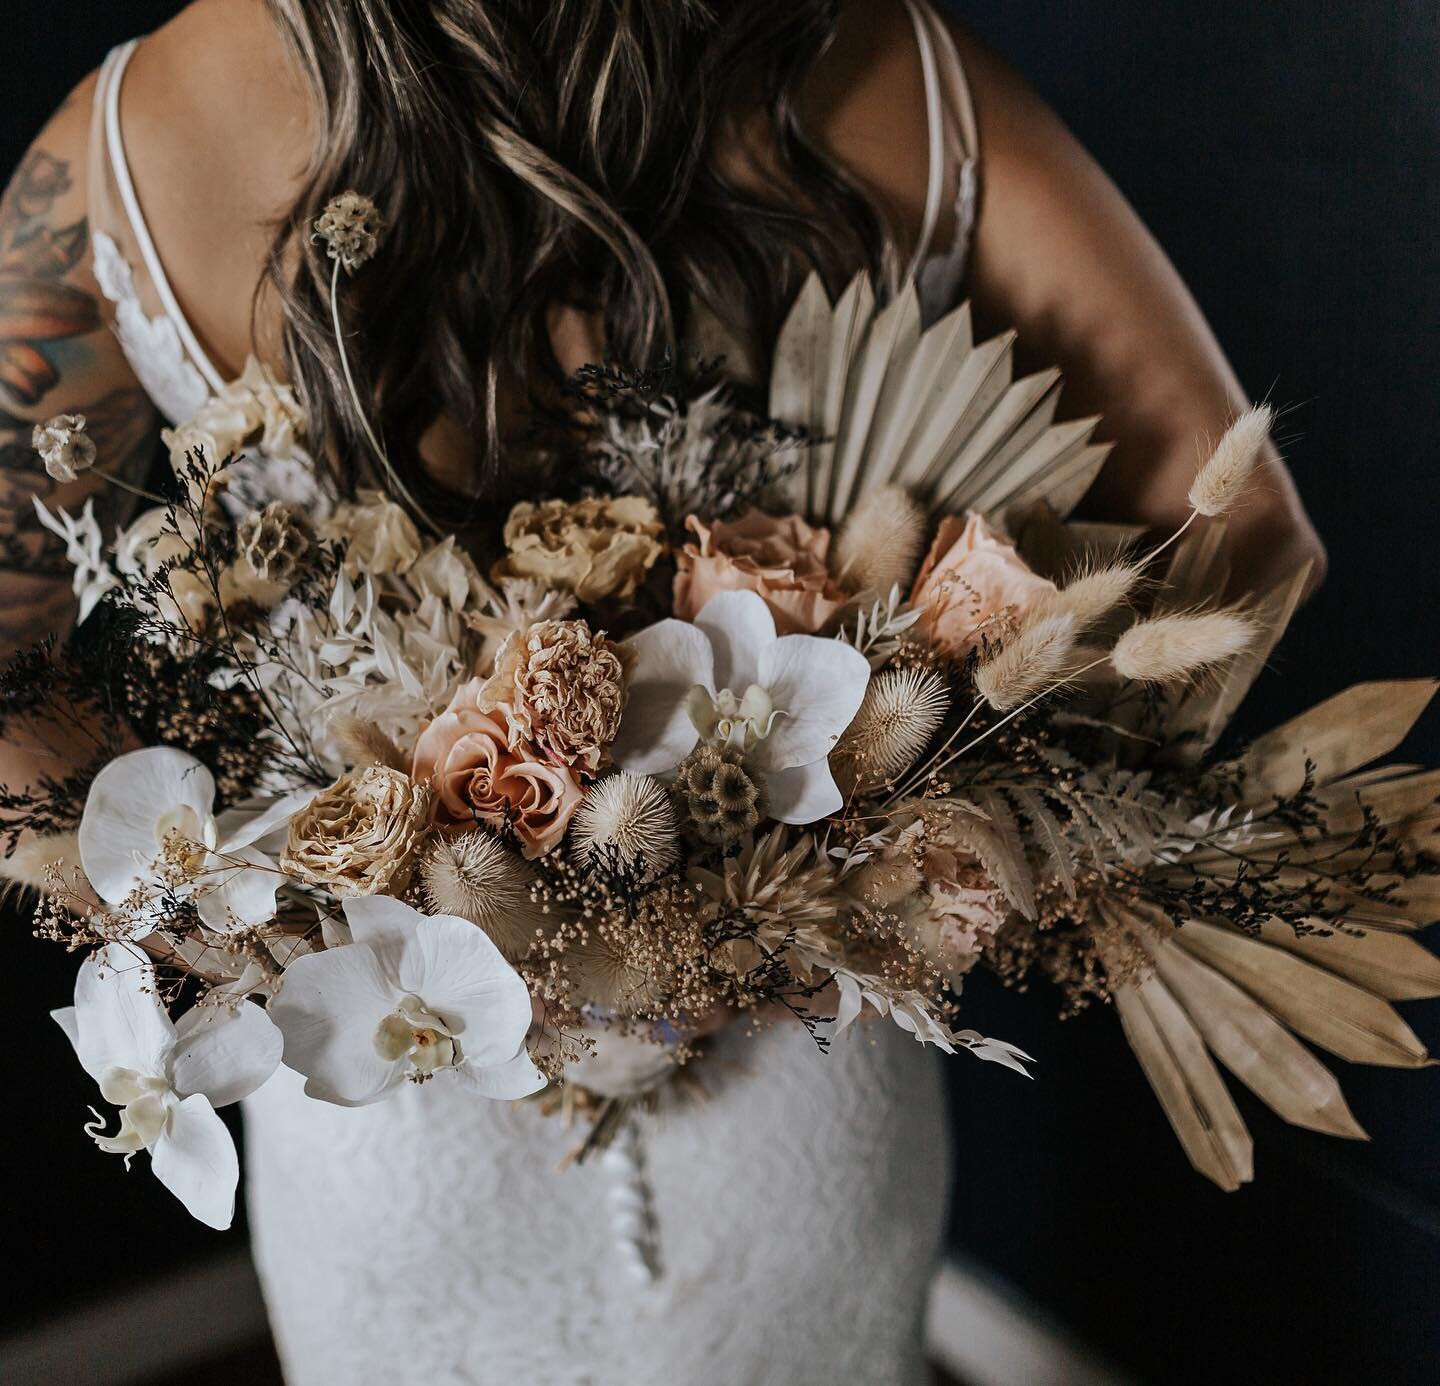 You guys! I&rsquo;m obsessed with the neutral tones of this dried boho bouquet! Here&rsquo;s a pro tip: If you plan on eloping out of state but want to use a florist local to you,
opt for a dried arrangement to accommodate your travel plans.